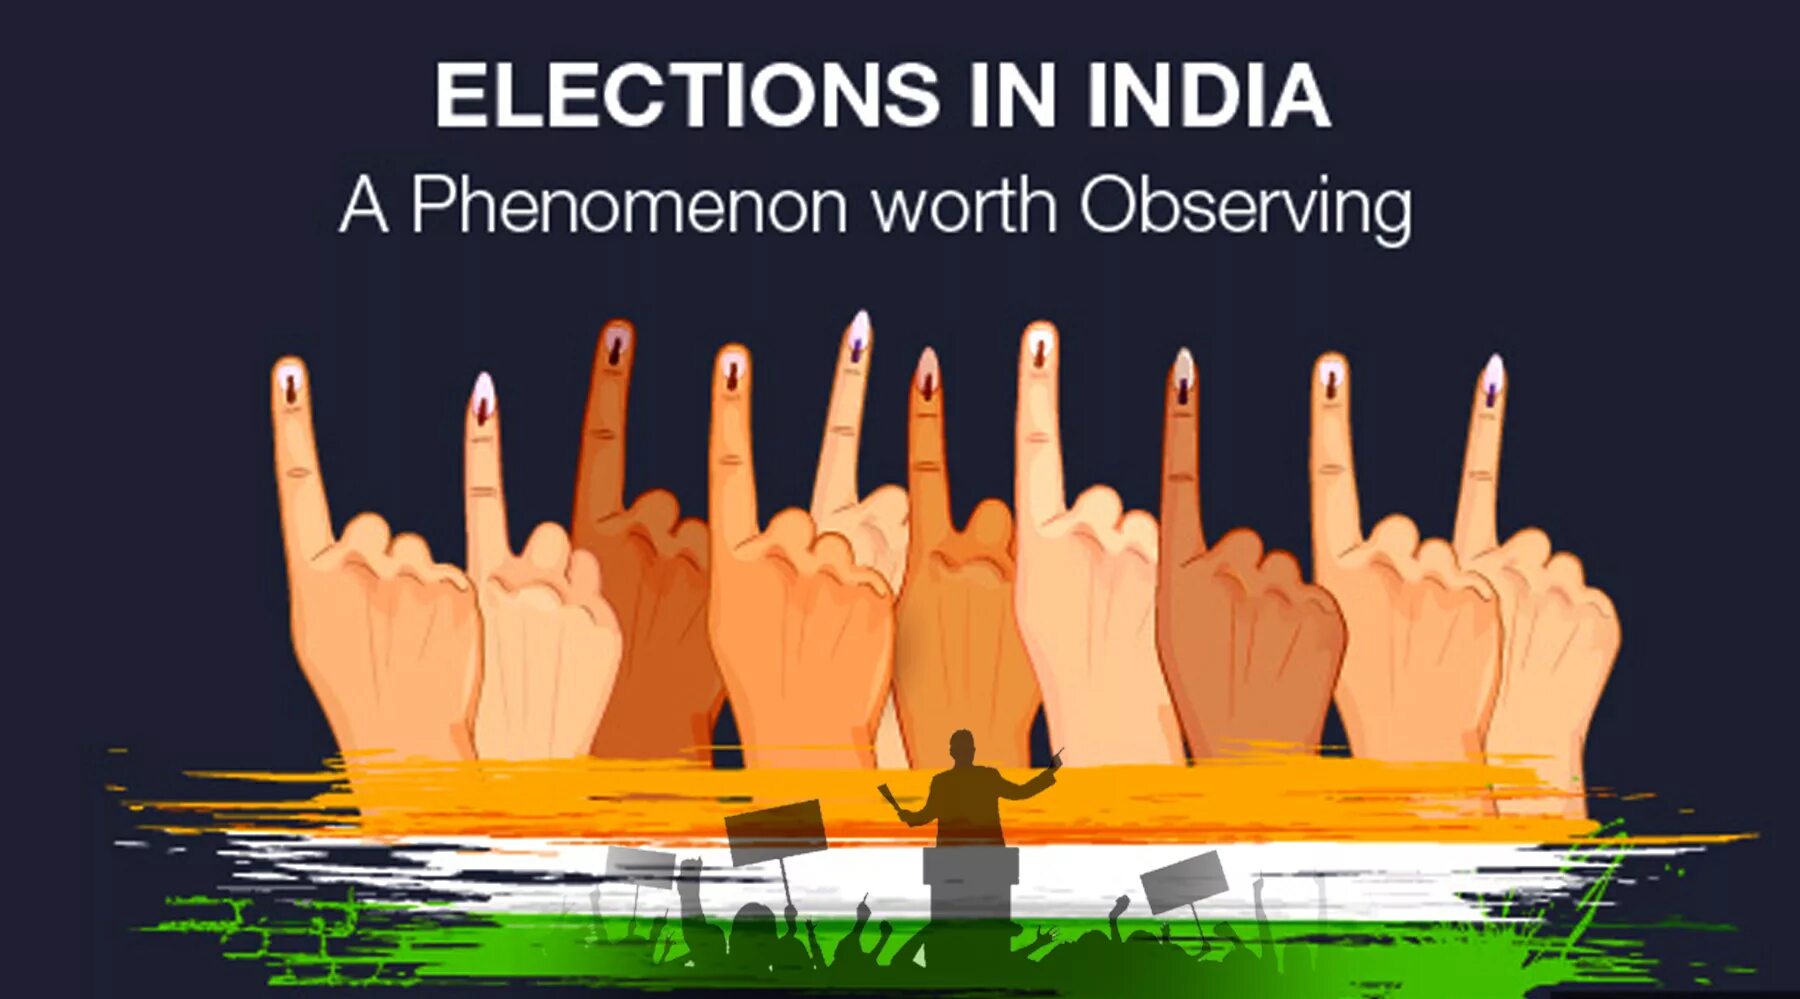 Voting day. Electoral Politics in India. Vote banner. Voting background. Election banner.